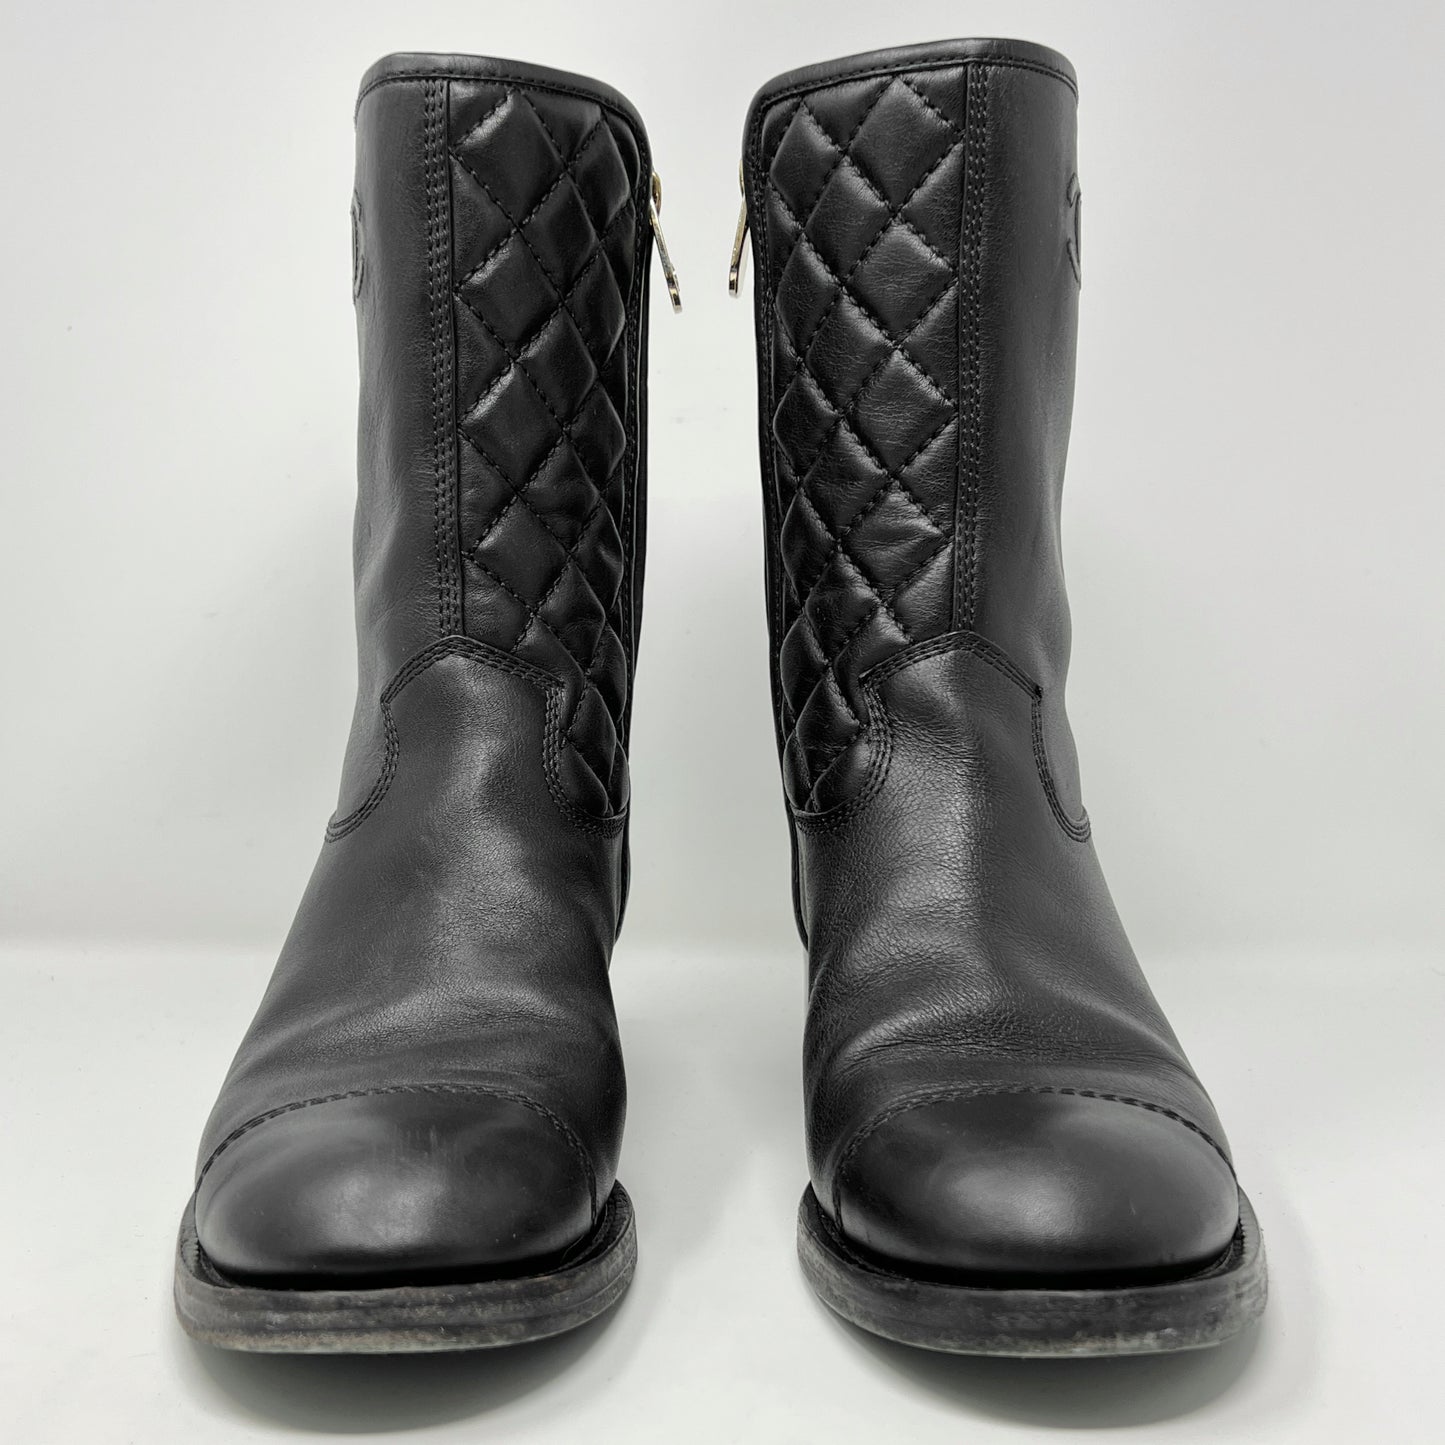 Chanel Black Quilted Matellase Leather Cap Toe Block Heel Mid Calf Boots Size EU 39